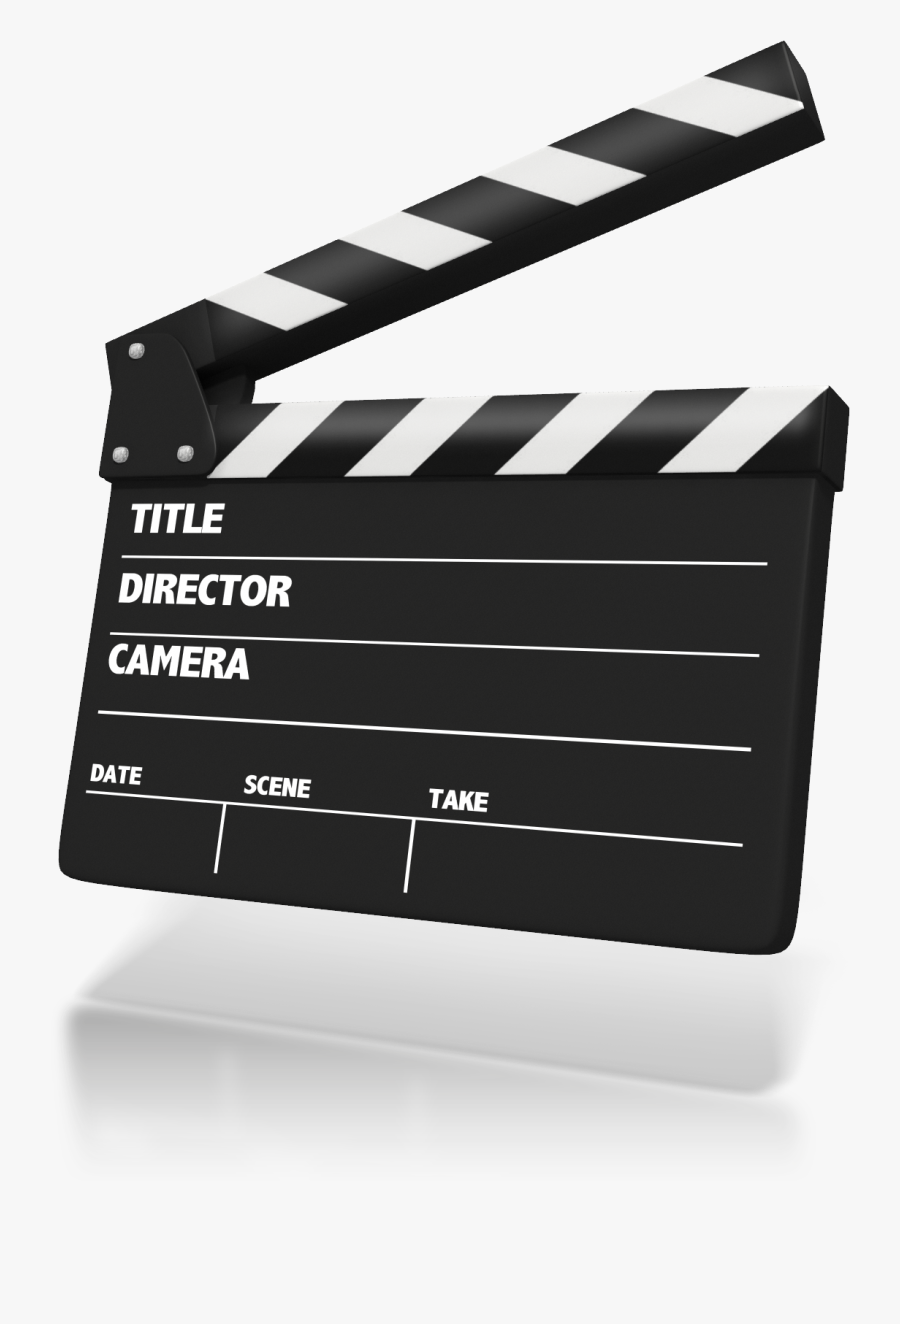 Clapperboard Animation Presentation Clapping Clip Art - Movie Clapper Board Animated, Transparent Clipart